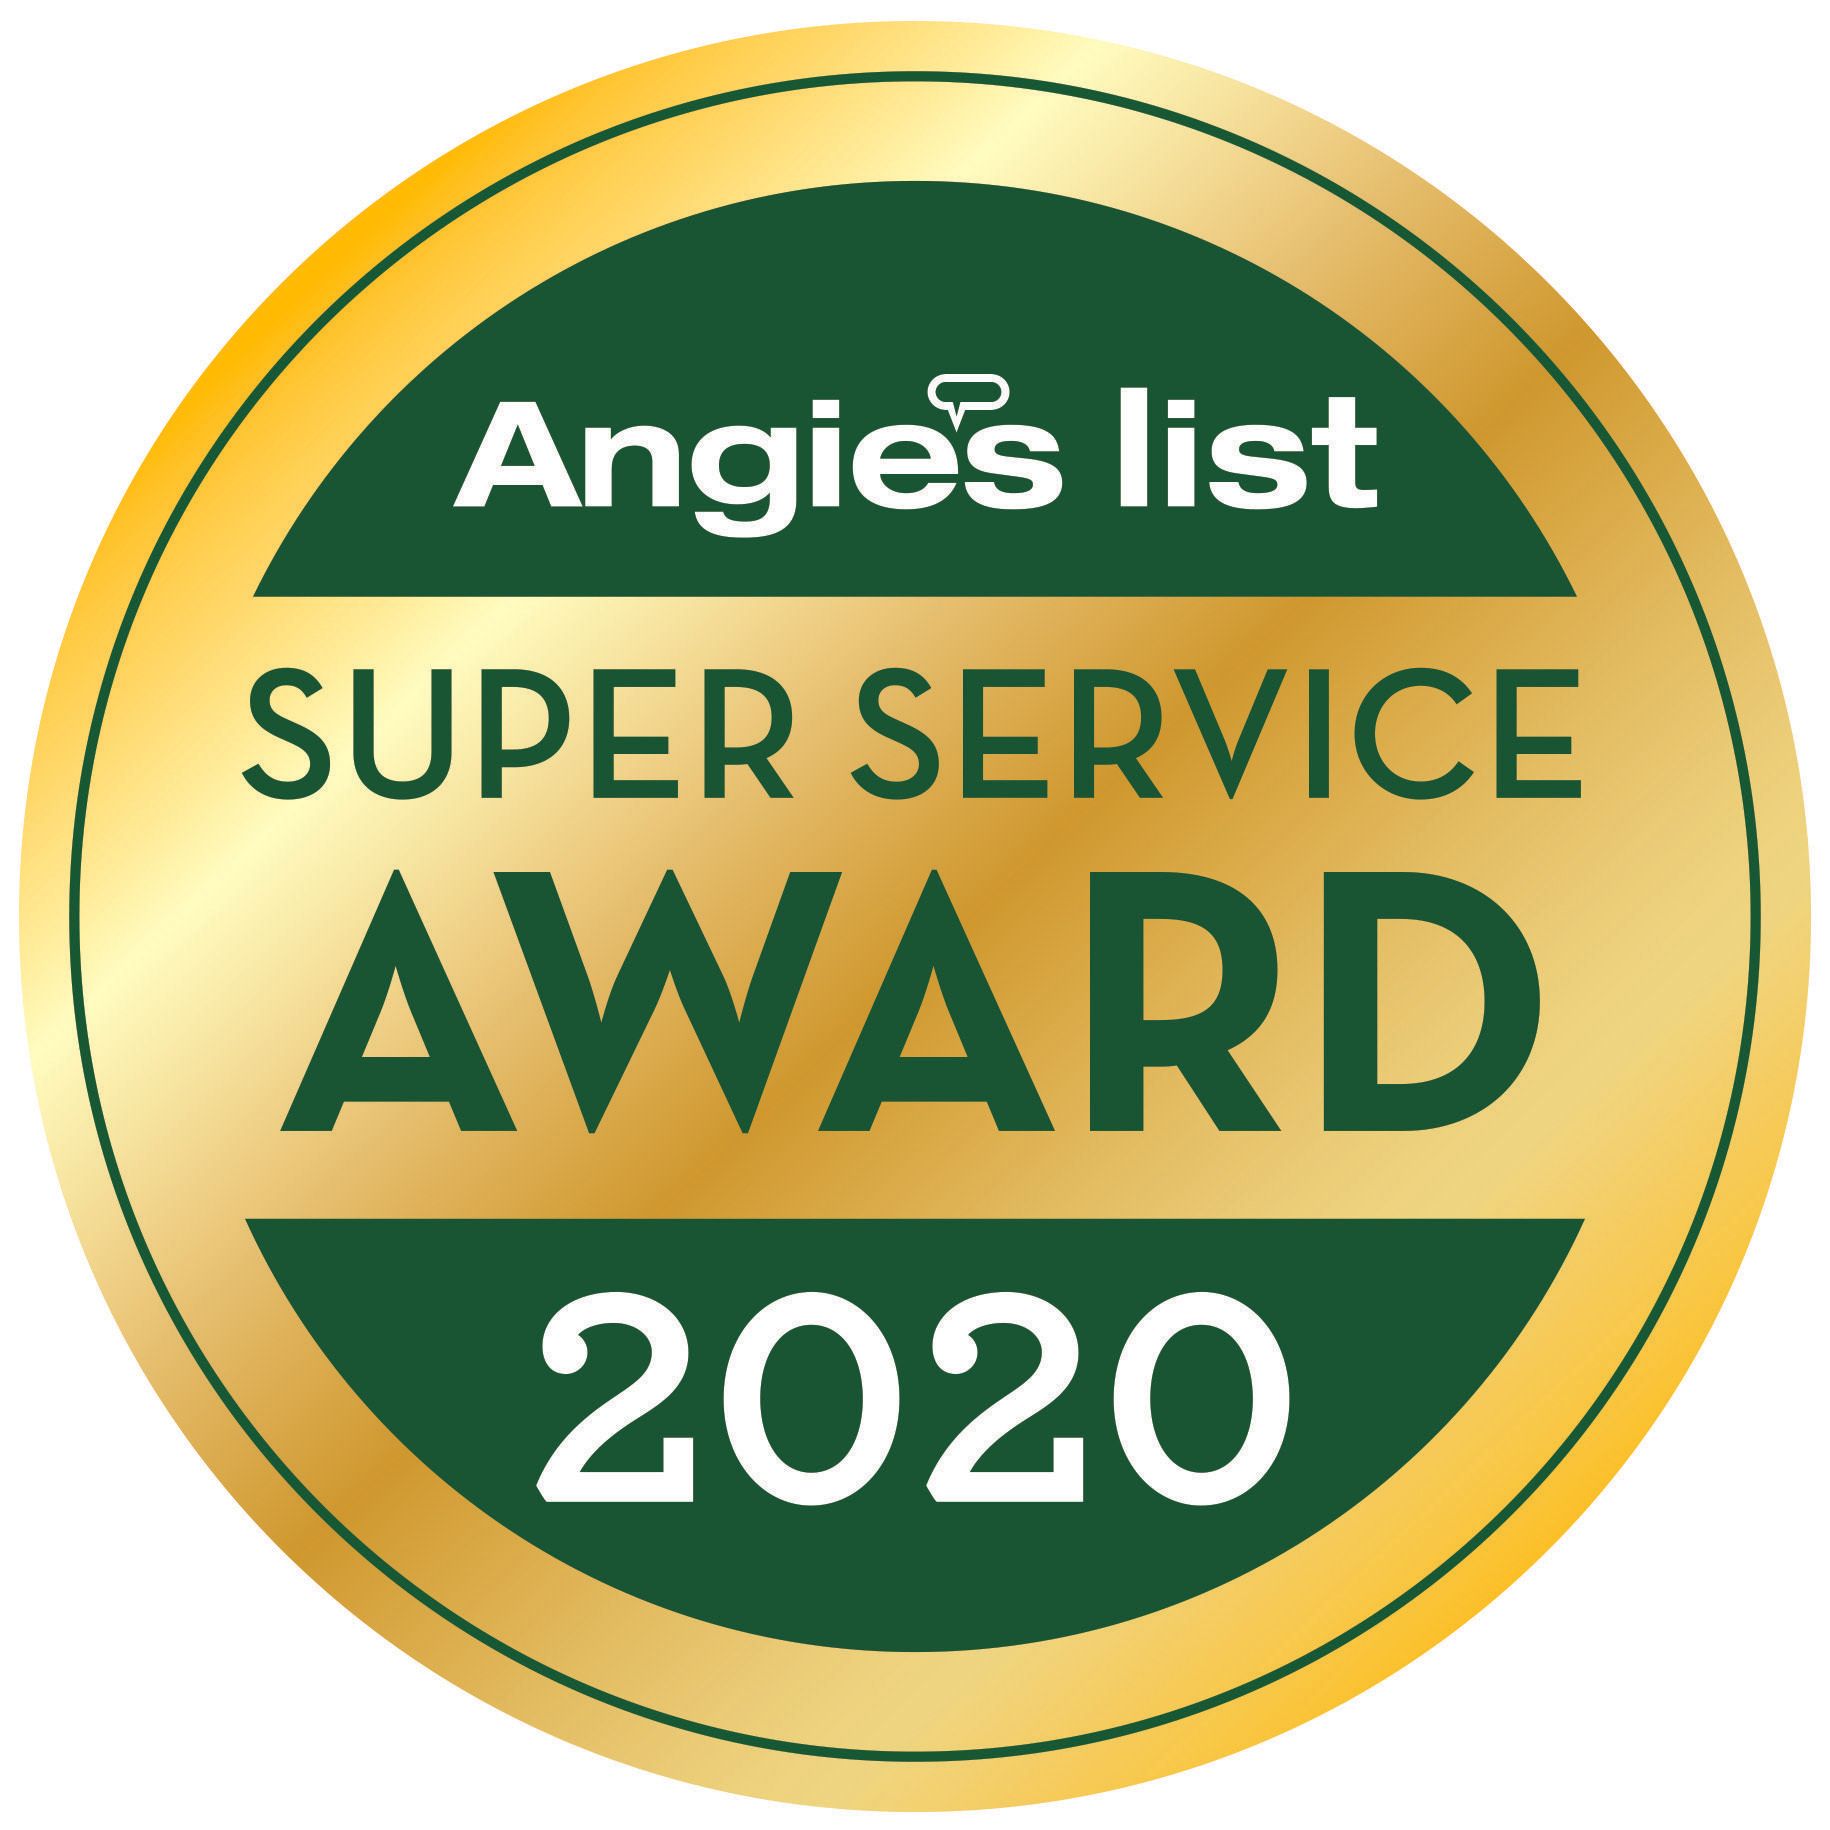 angie 's list super service award 2020 is a green and gold badge .